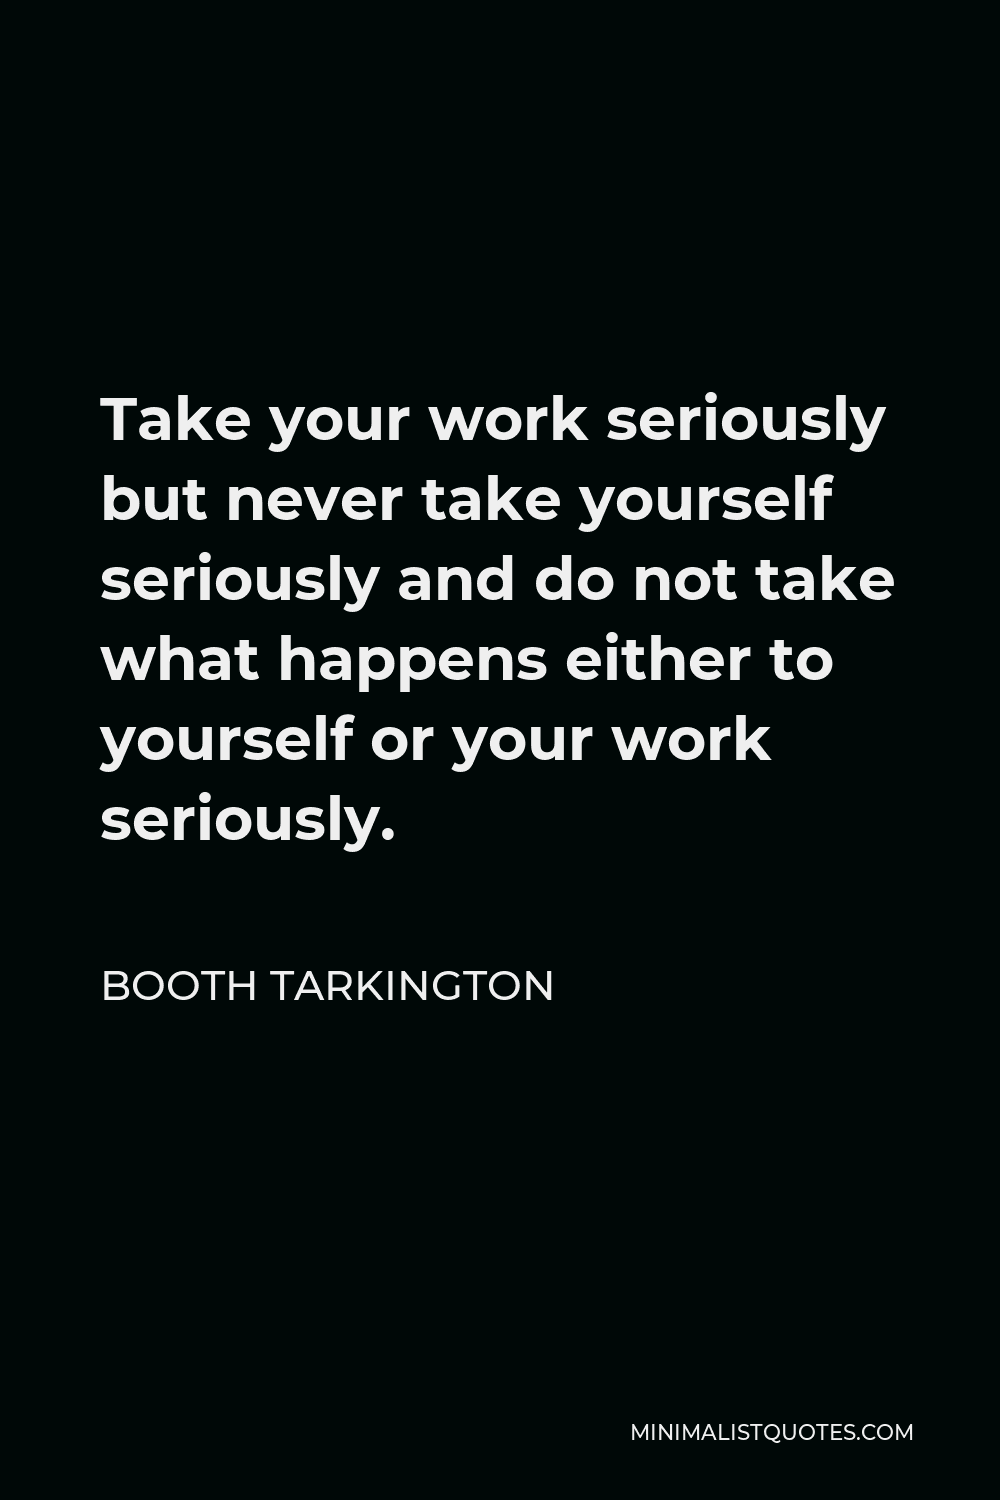 Booth Tarkington Quote - Take your work seriously but never take yourself seriously and do not take what happens either to yourself or your work seriously.